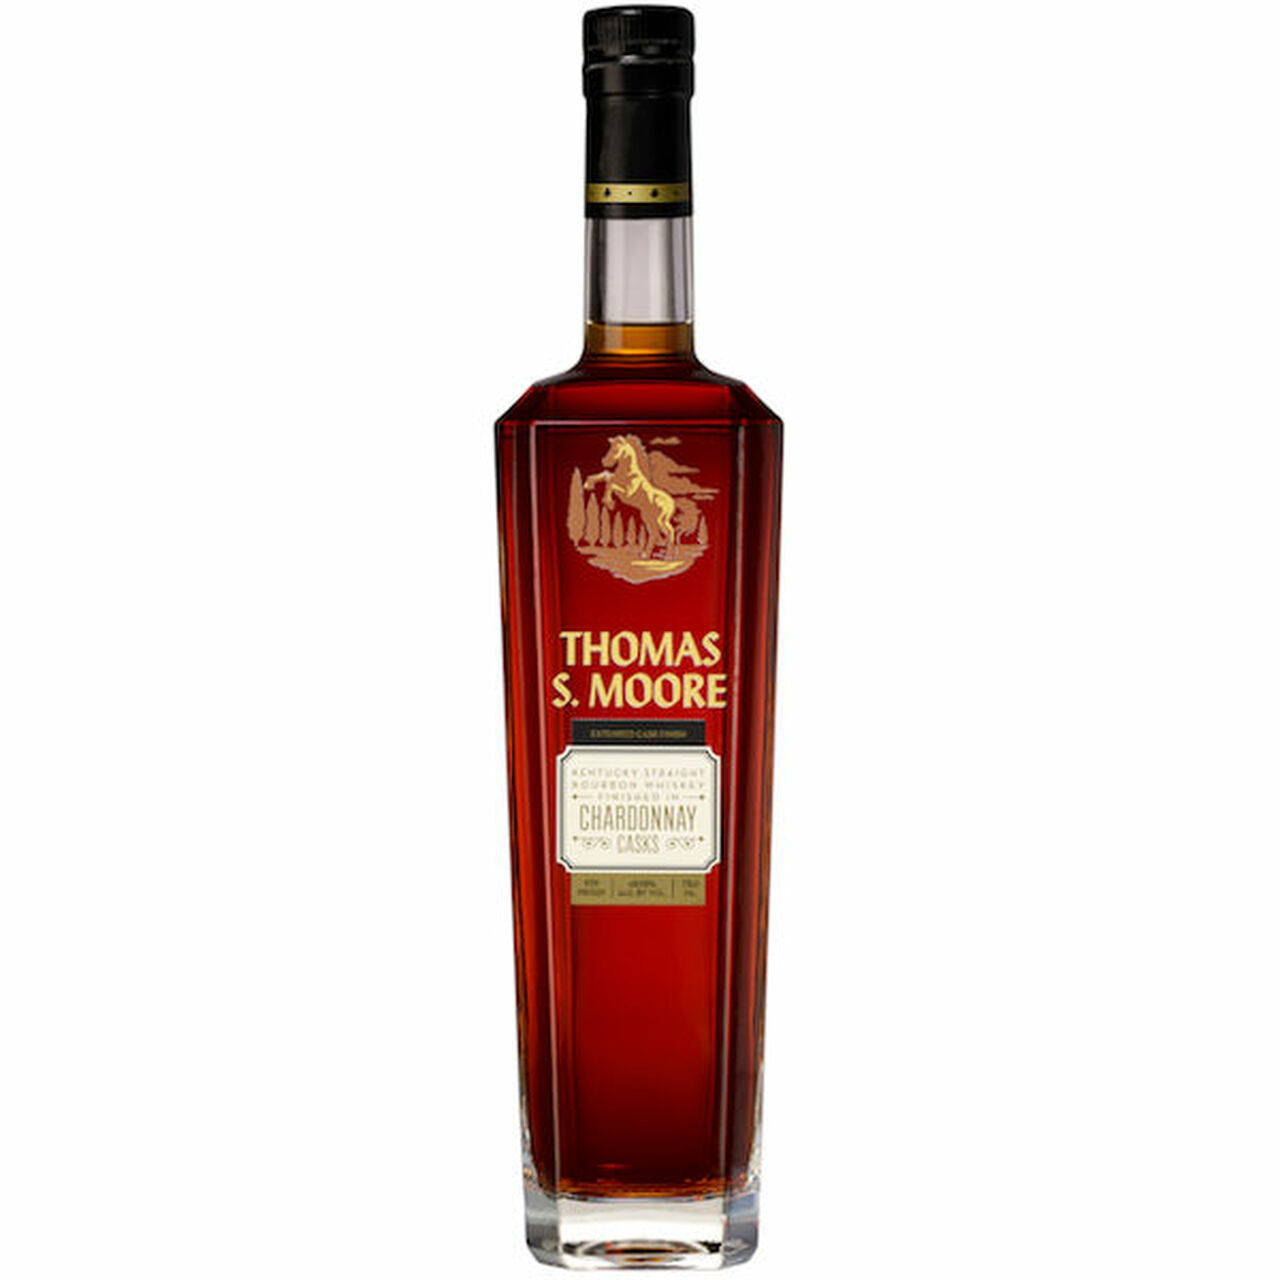 Thomas S. Moore Bourbon Finished In Chardonnay Casks